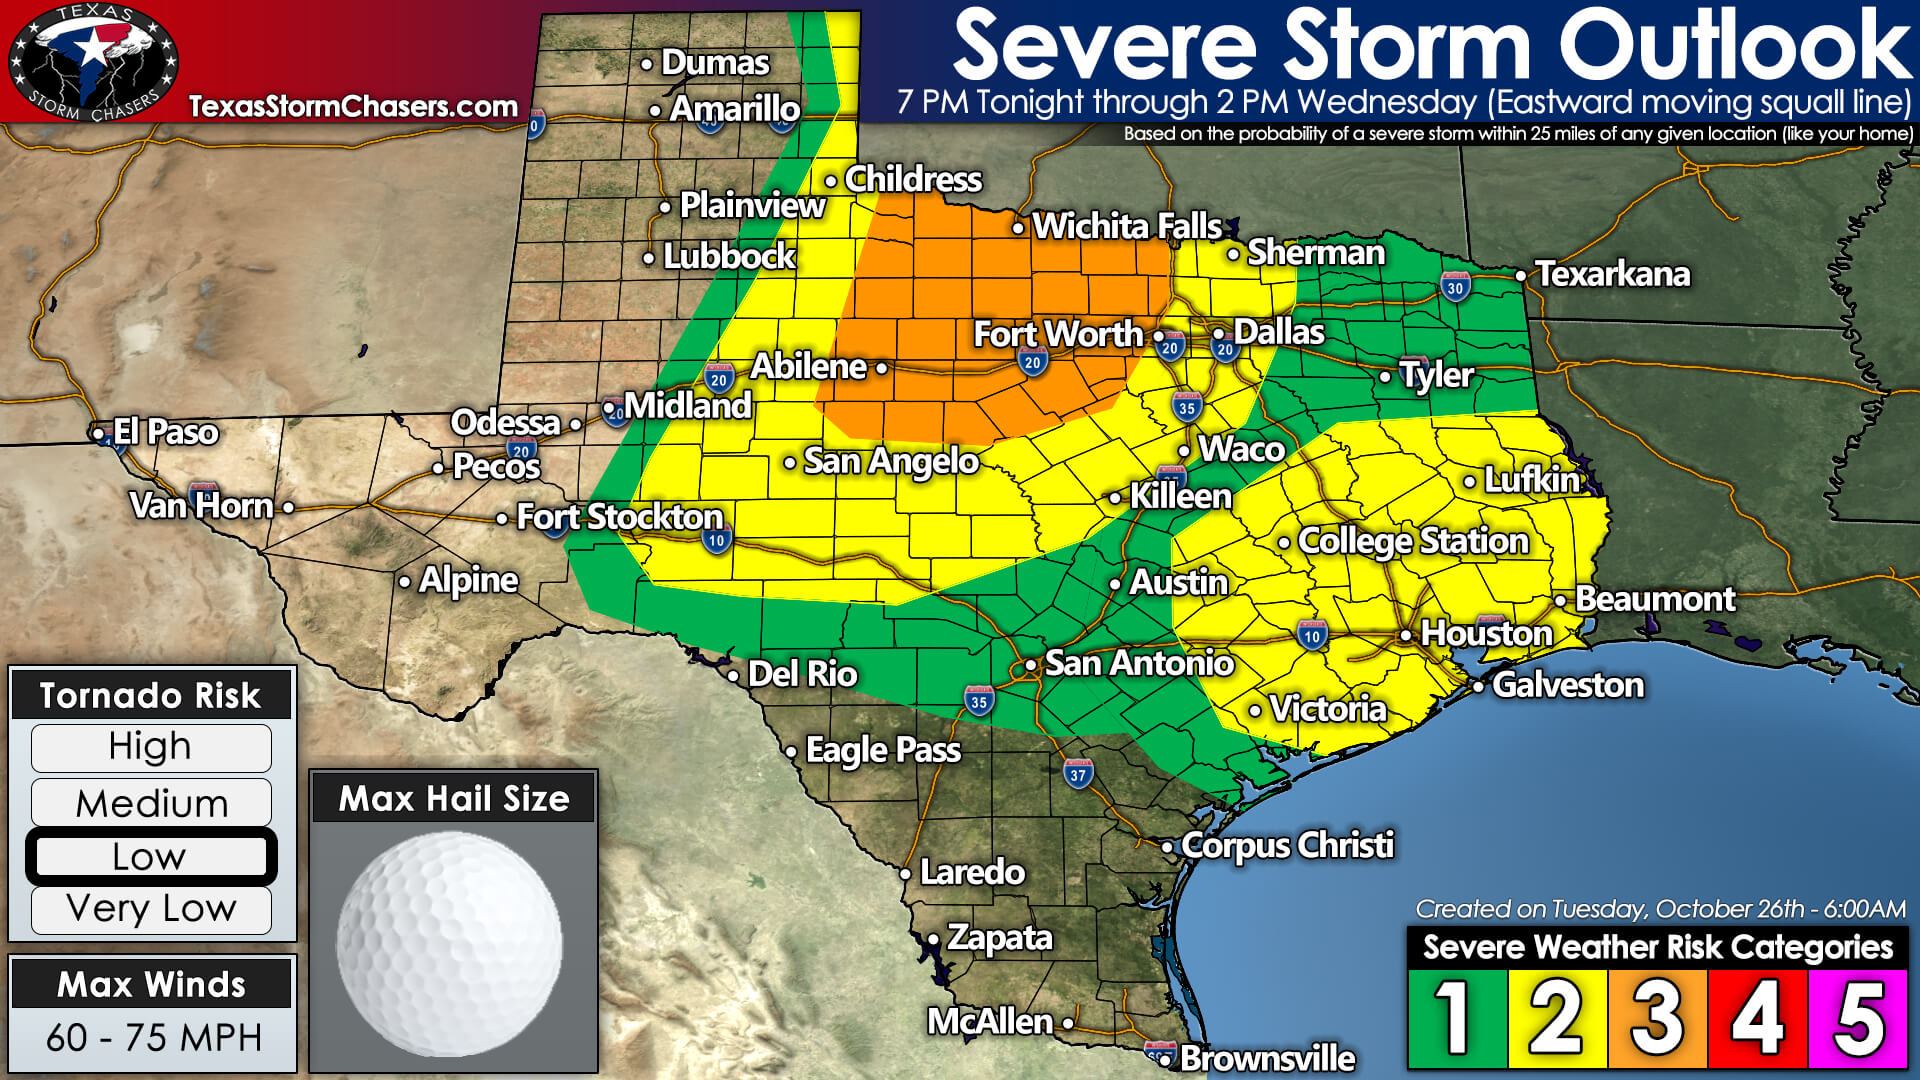 Line of Strong/Severe Storms will move east across Texas Late Tonight & Wednesday Morning